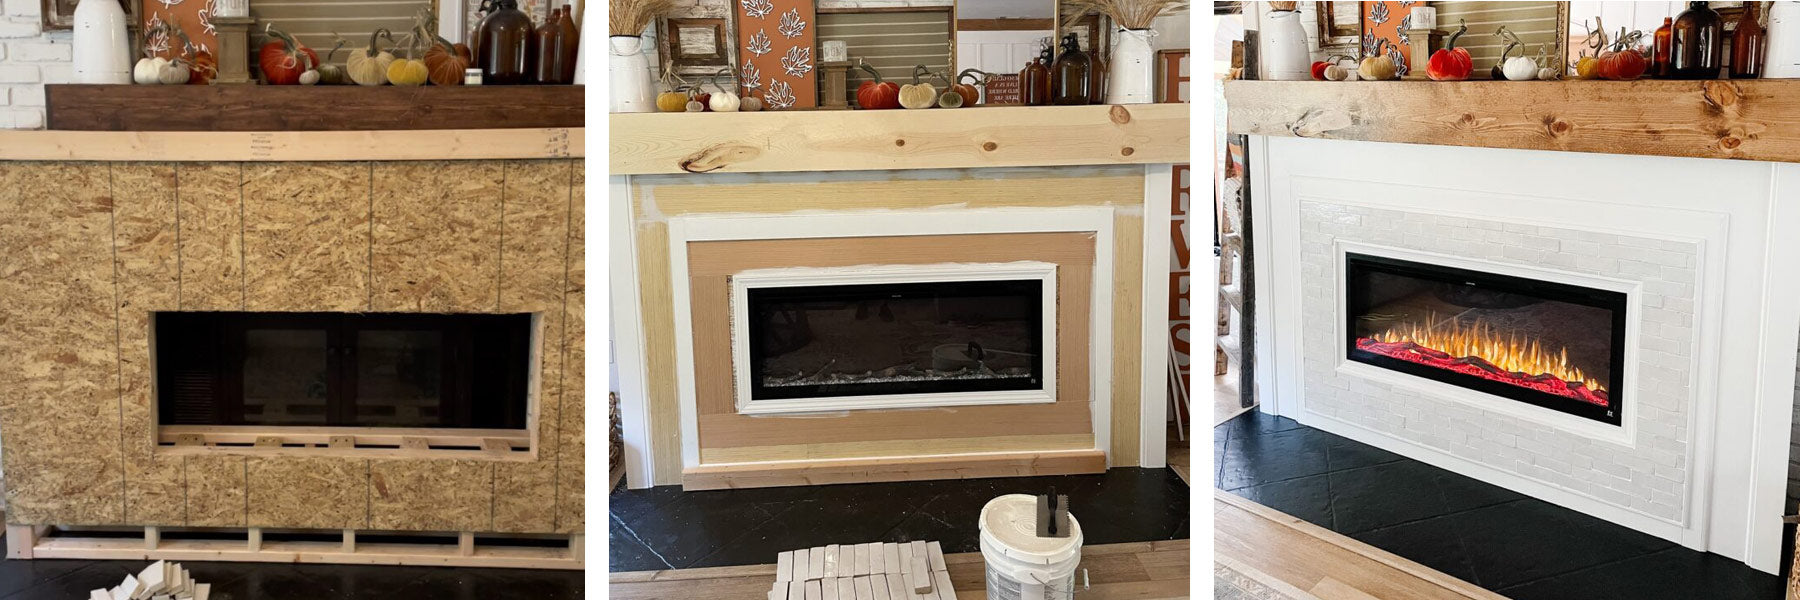 Progression of fireplace renovation by @redbrickfauxfarmhouse featuring Touchstone Sideline Elite Electric Fireplace